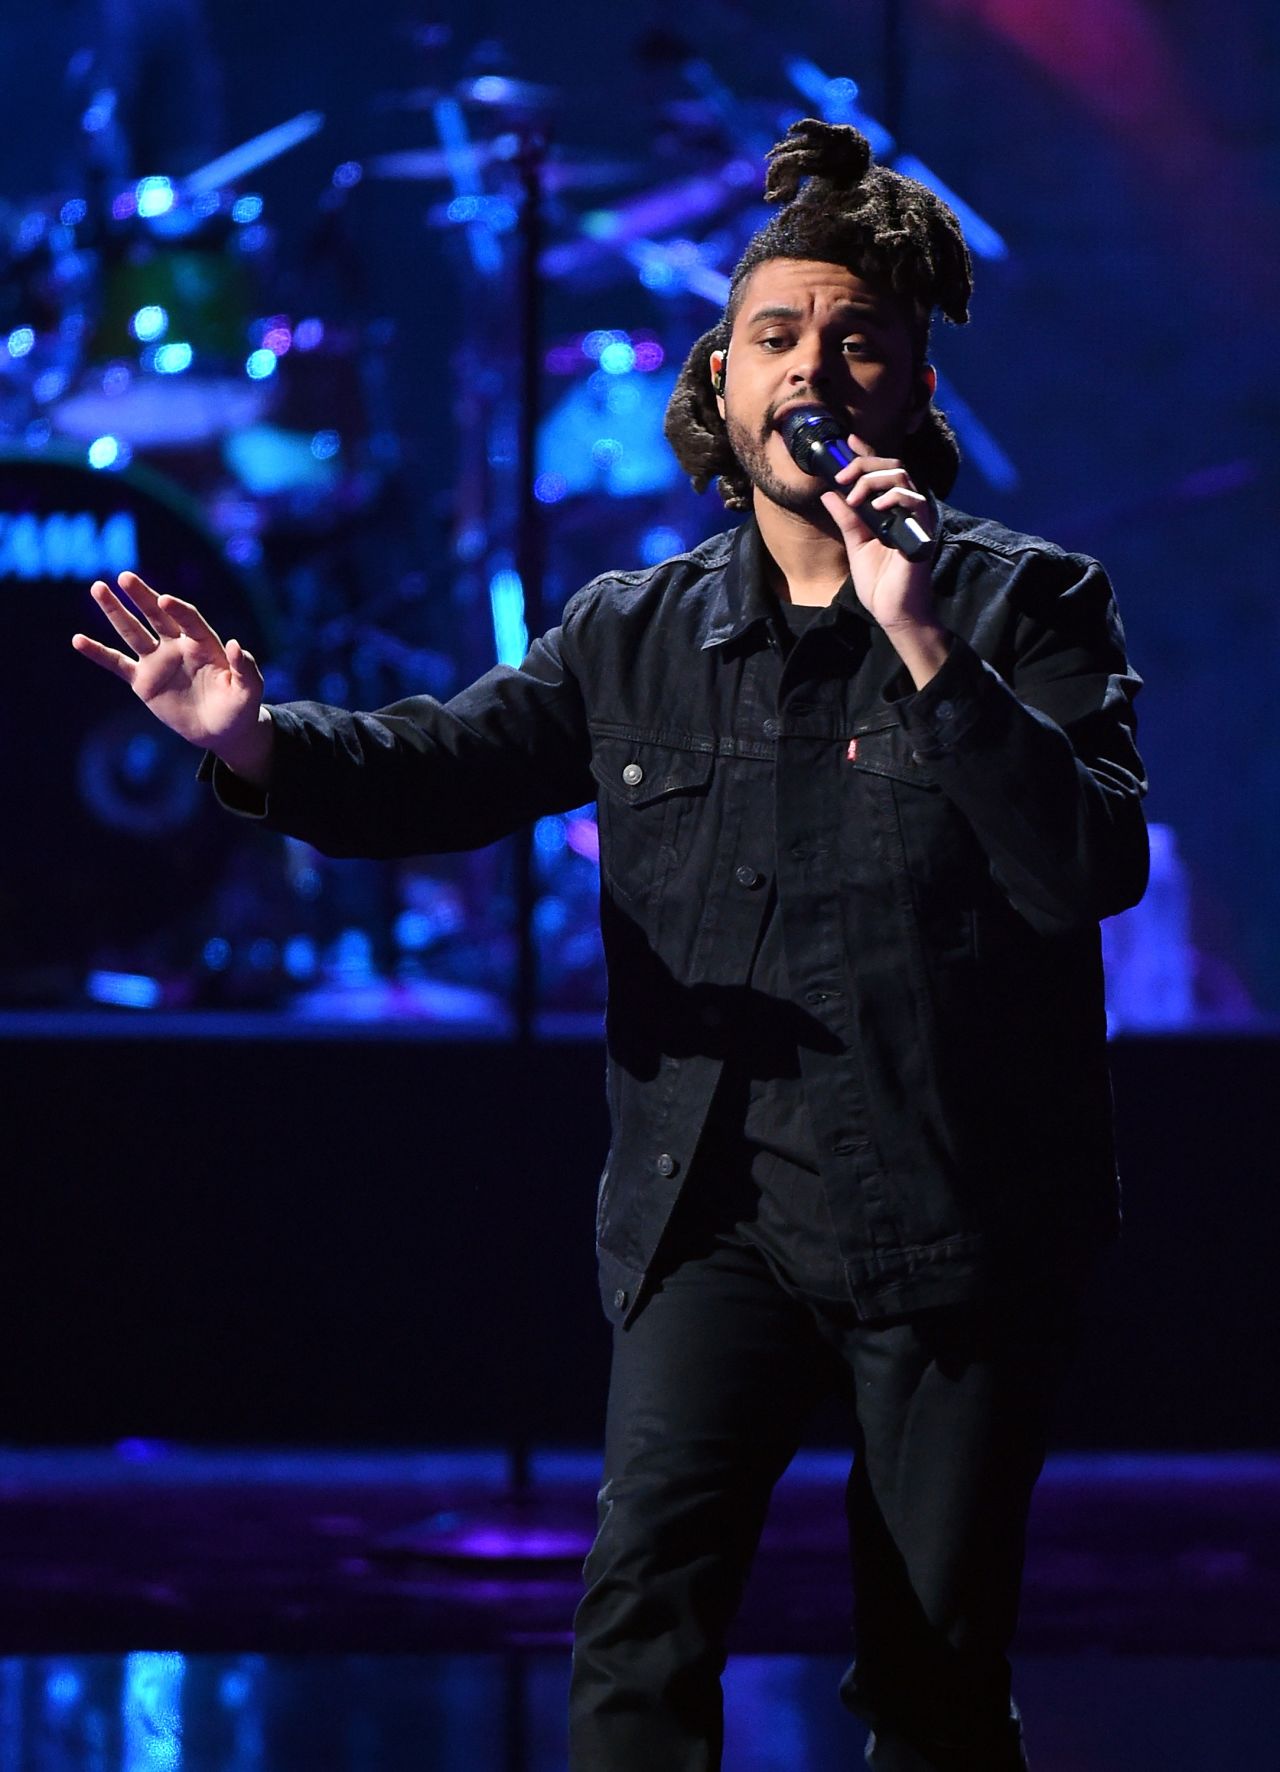 The Weeknd had a breakout year in 2015. His AMA nominations include artist of the year, song of the year and best new artist.